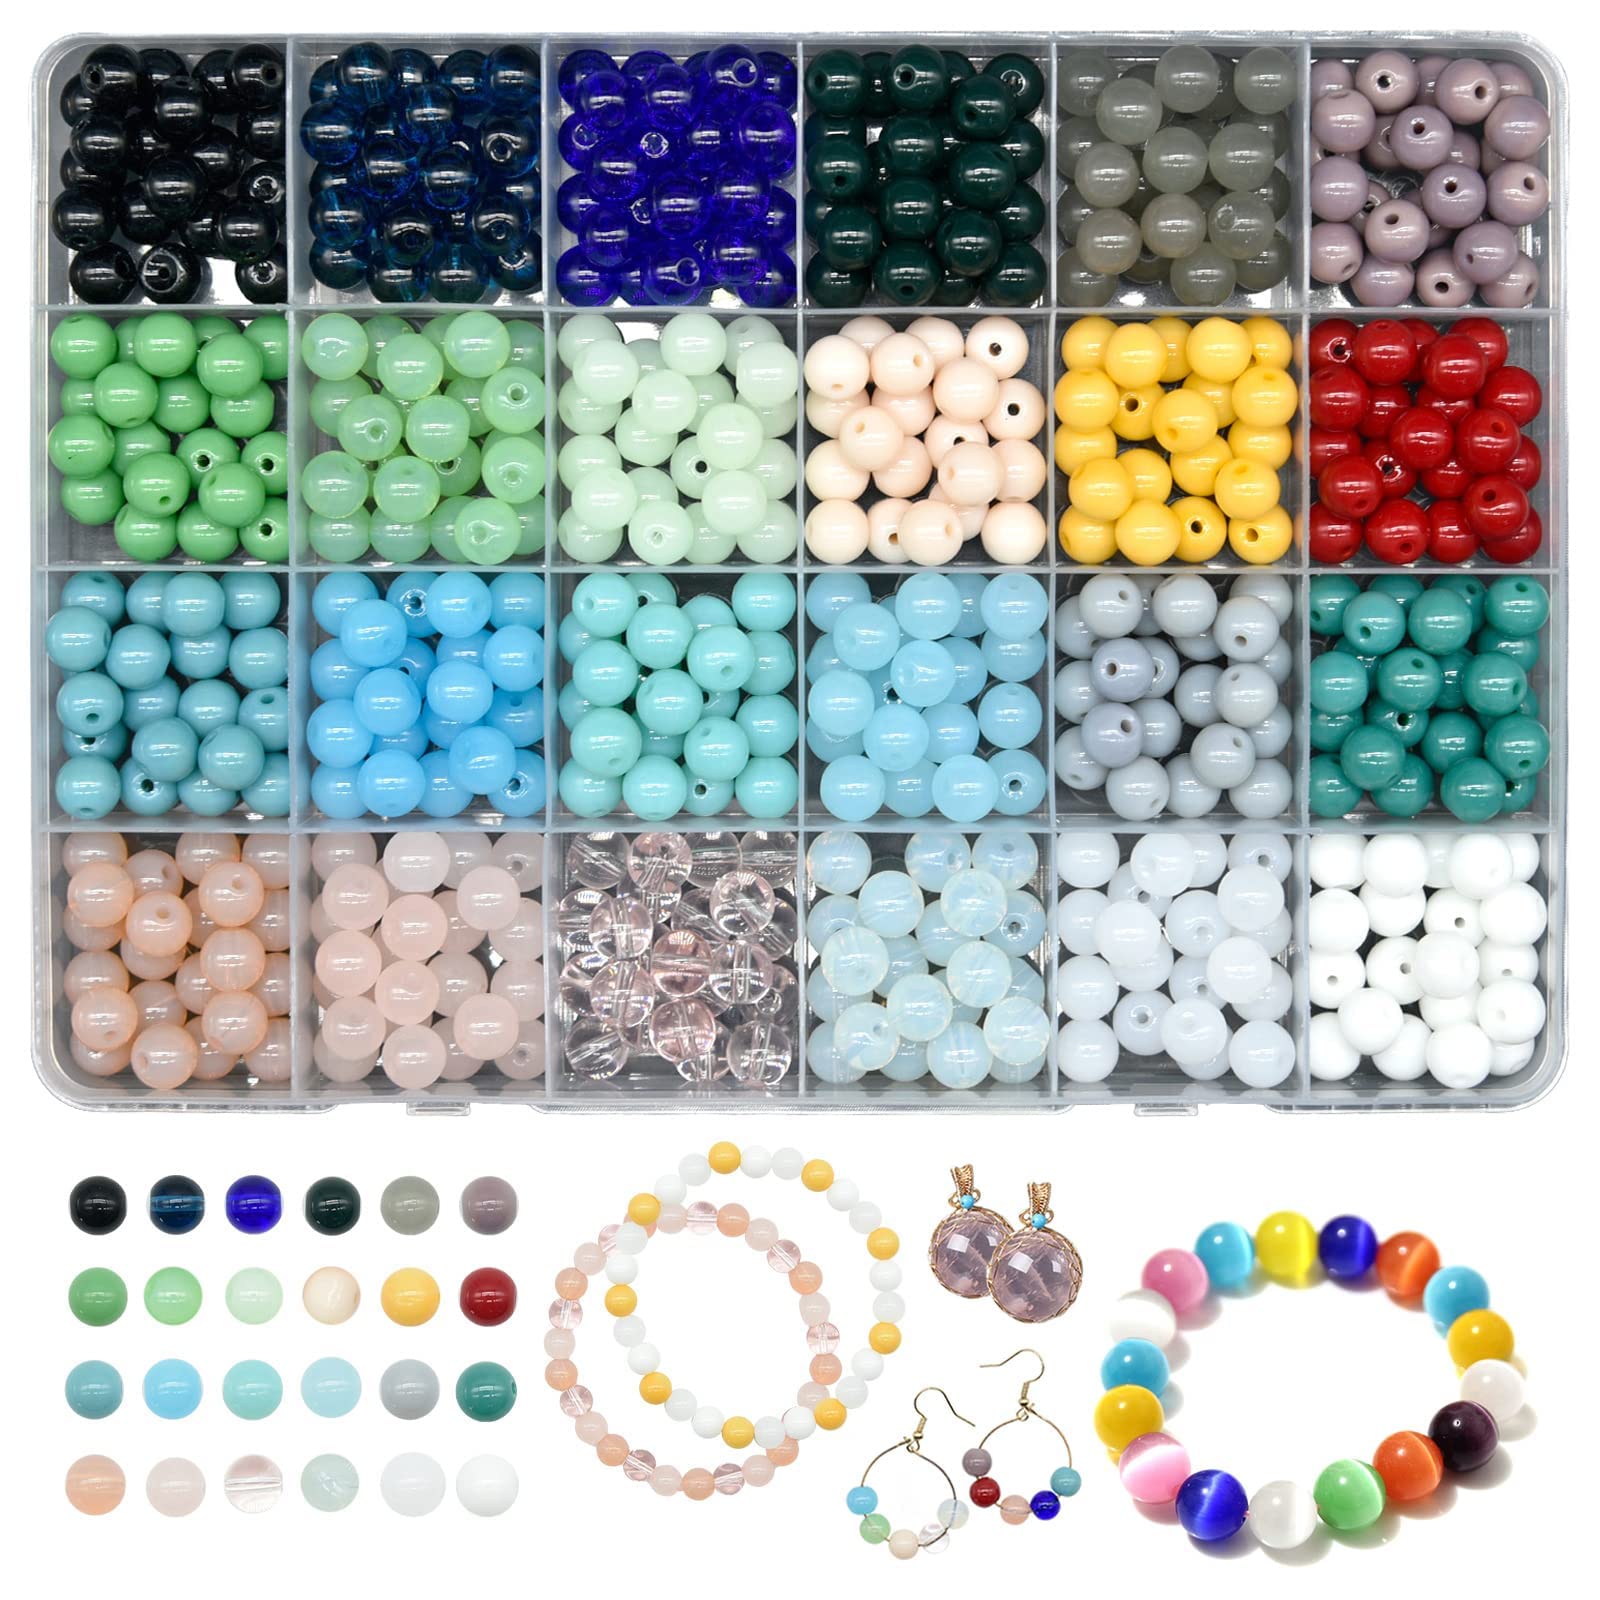 Kabuer Glass Beads Jewelry Making, Crystal Beads for Bracelets, Jewelry Making Crystal Gemstone Beaded Bracelets Kit with Accessories?8mm Round 24Colors?480+